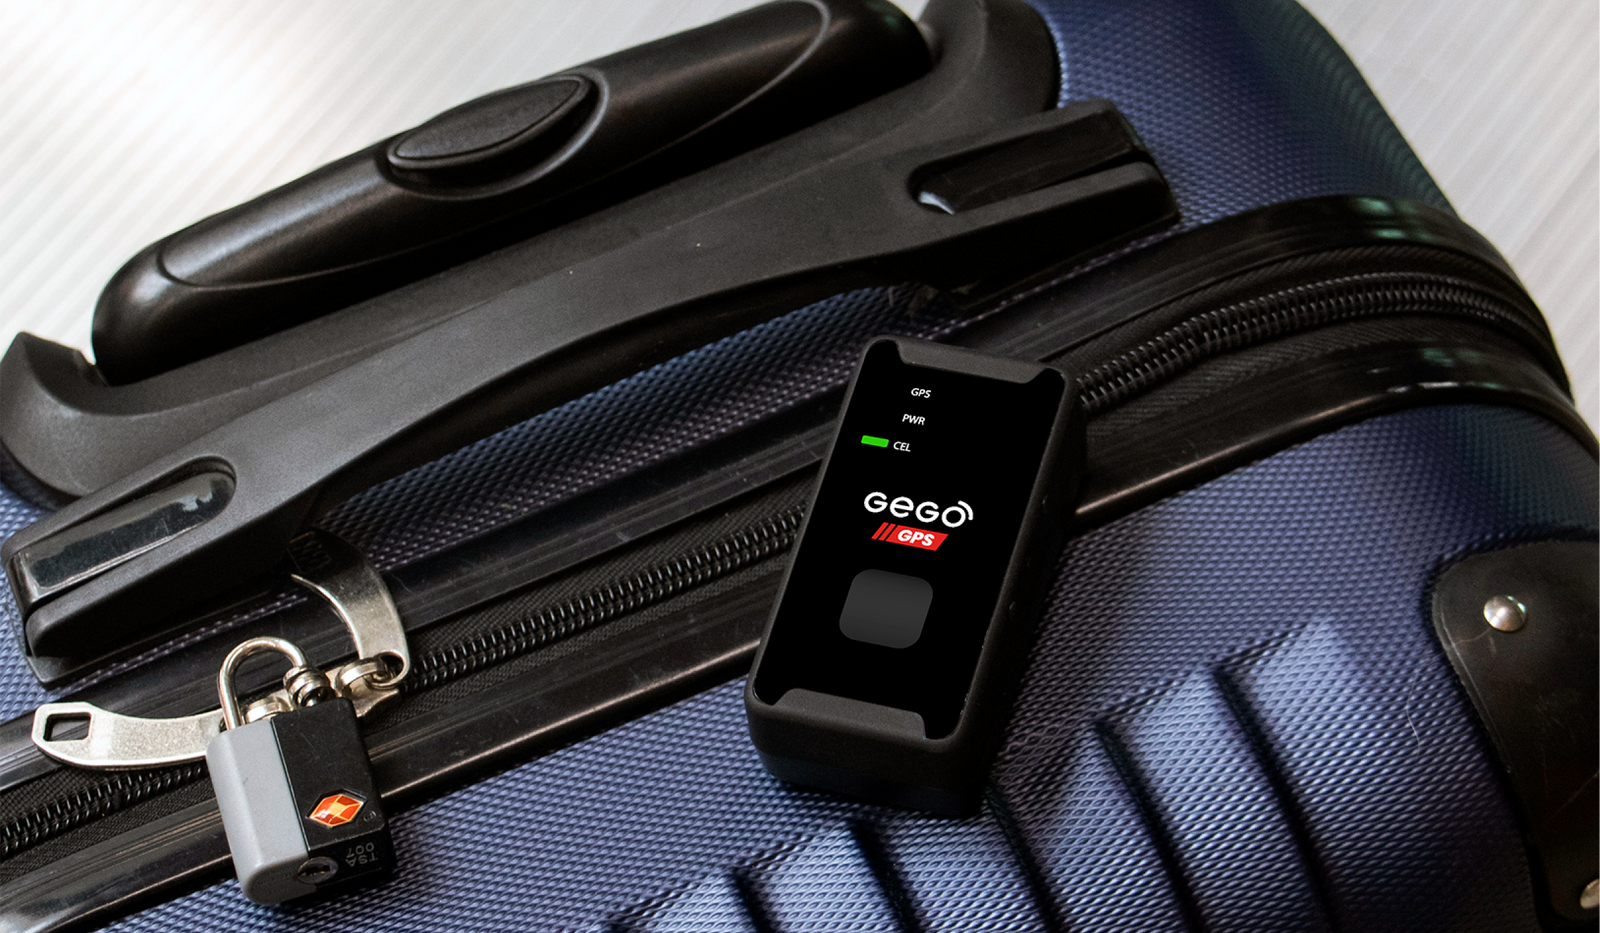 GEGO tracking device for lost luggage